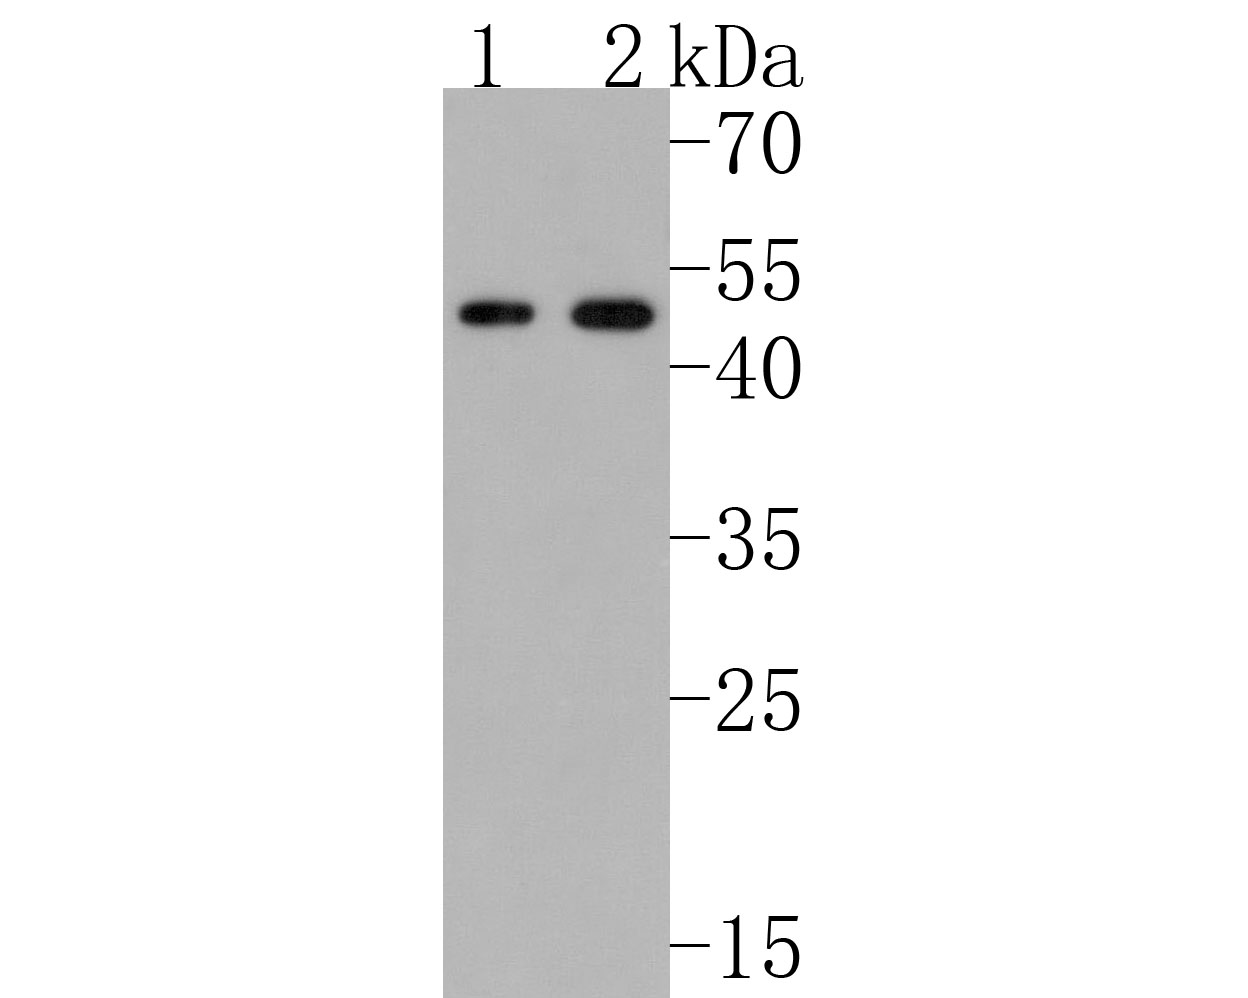 Western blot analysis of NK-p44 on different lysates. Proteins were transferred to a PVDF membrane and blocked with 5% NFDM/TBST for 1 hour at room temperature. The primary antibody (HA720070, 1/500) was used in 5% NFDM/TBST at room temperature for 2 hours. Goat Anti-Rabbit IgG - HRP Secondary Antibody (HA1001) at 1:200,000 dilution was used for 1 hour at room temperature.<br />
Positive control: <br />
Lane 1: K562 cell lysate<br />
Lane 2: HL-60 cell lysate